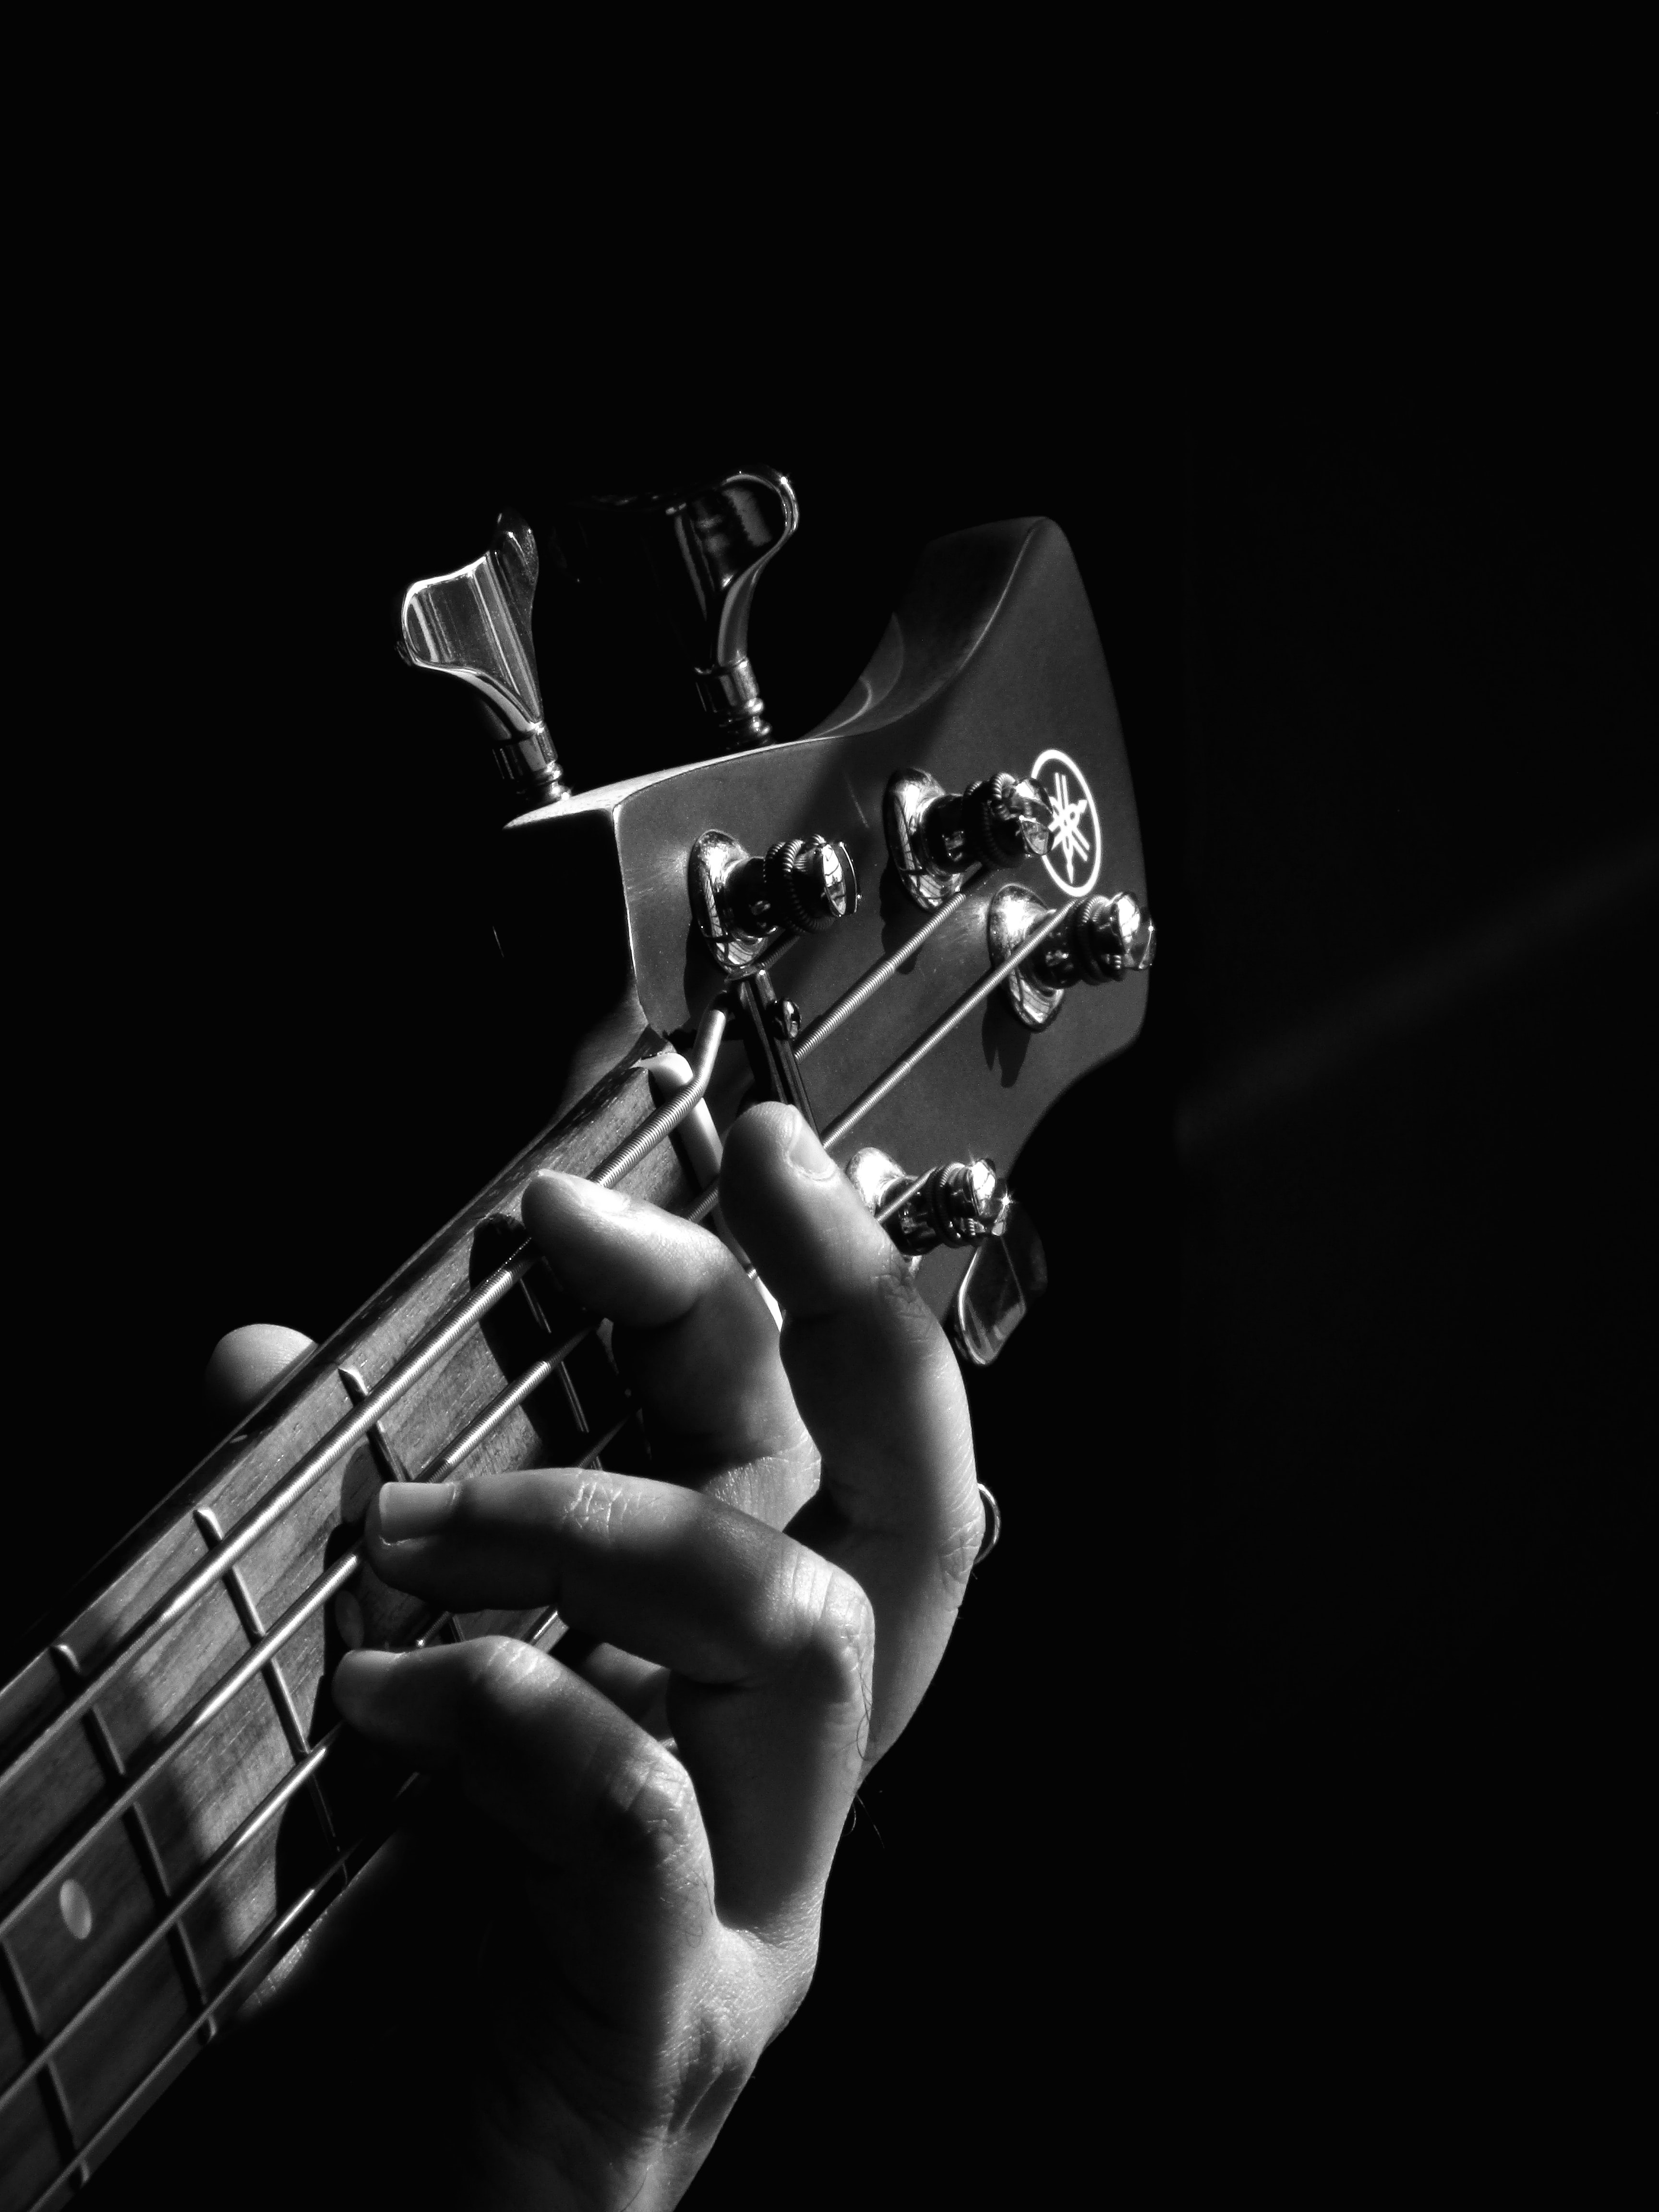 android chb, guitar, musical instrument, music, hand, vulture, bw